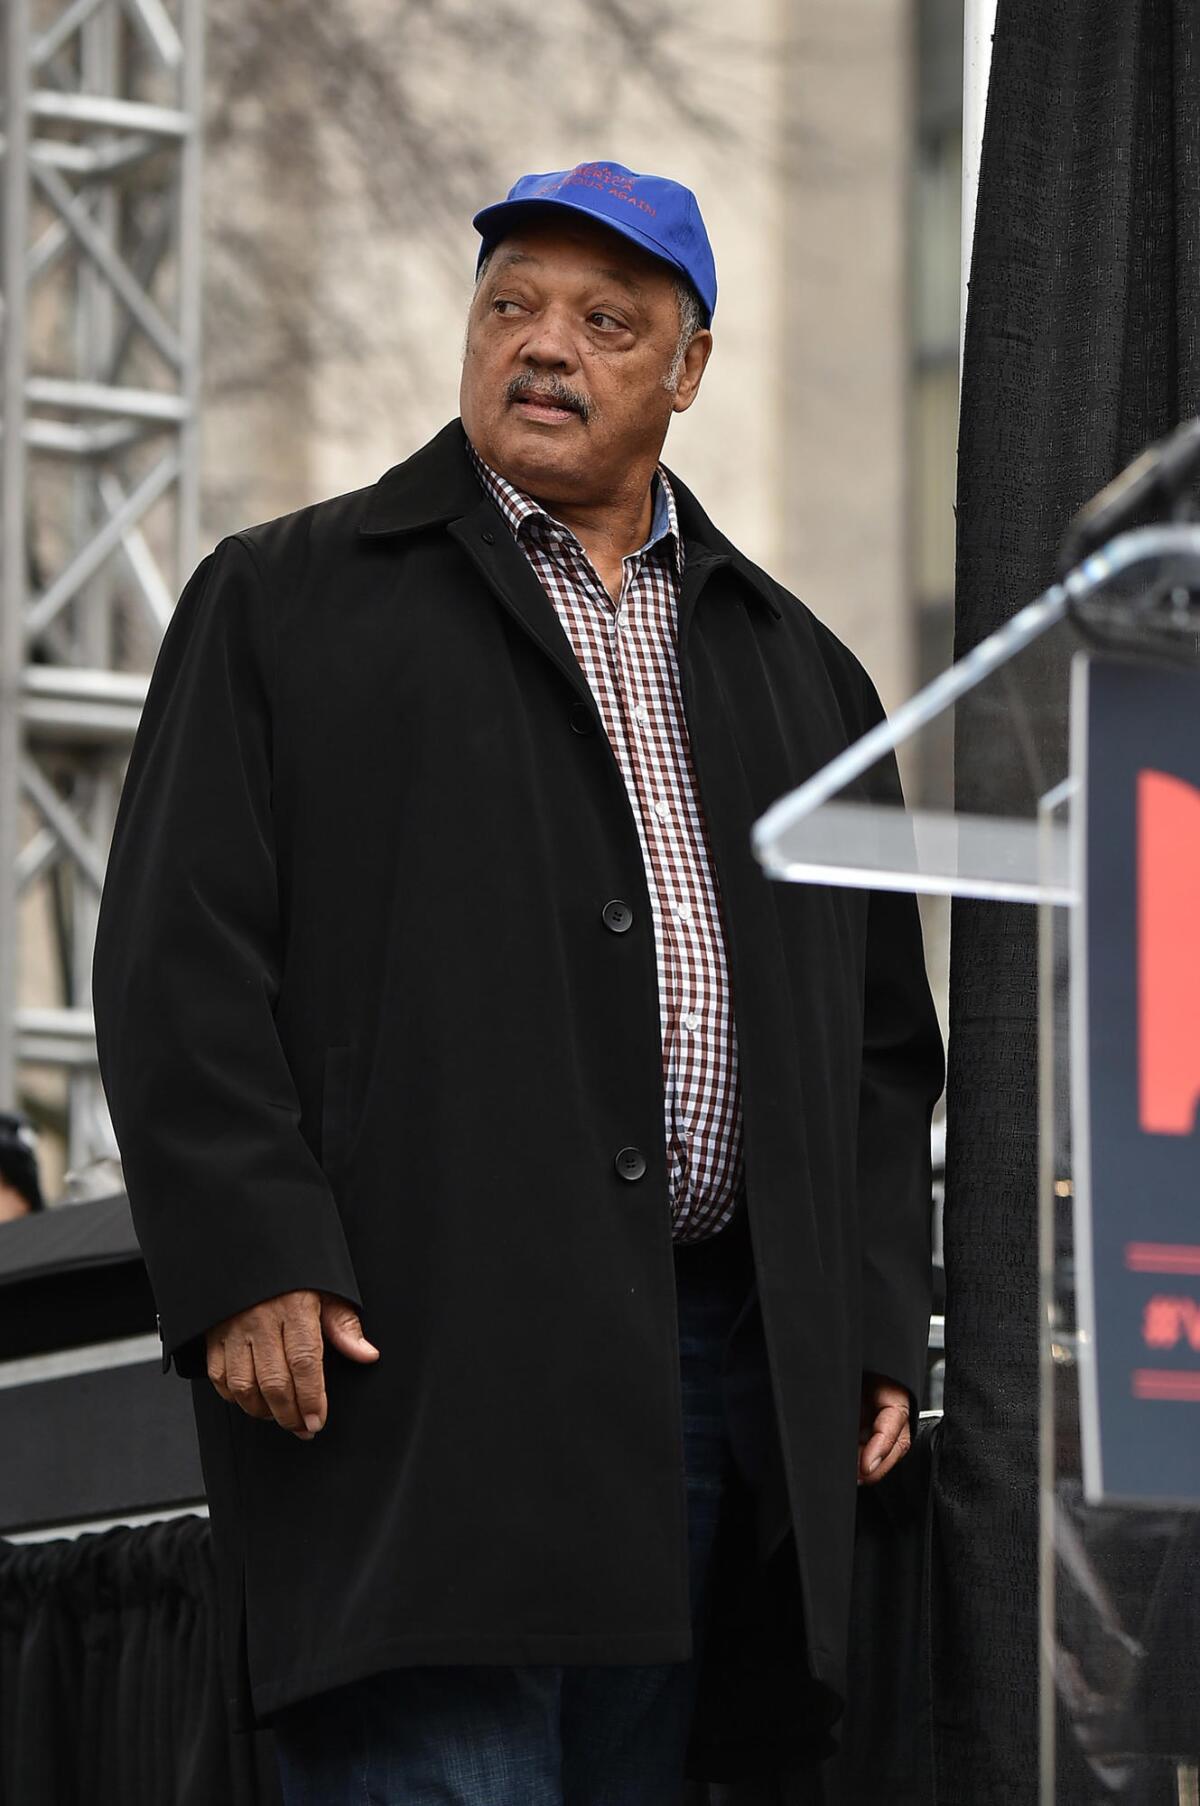 The Rev. Jesse Jackson appears onstage during the Women's March on Washington.